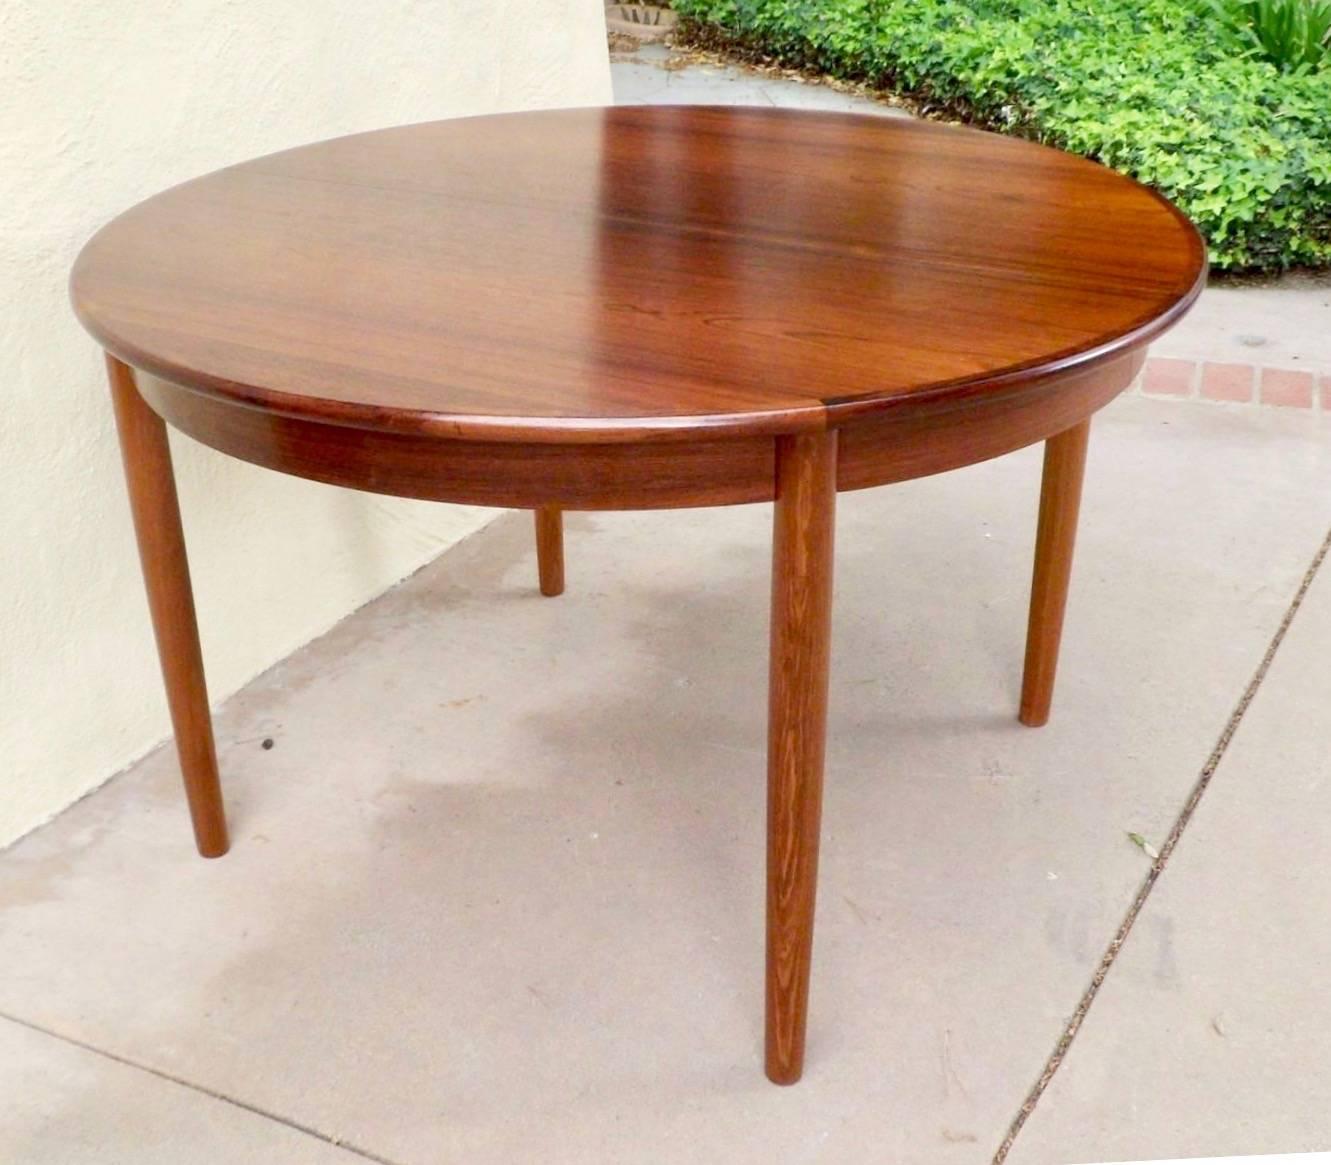 Mid-20th Century Danish Mid-Century Modern Extendable Rosewood Dining Table with Leaves